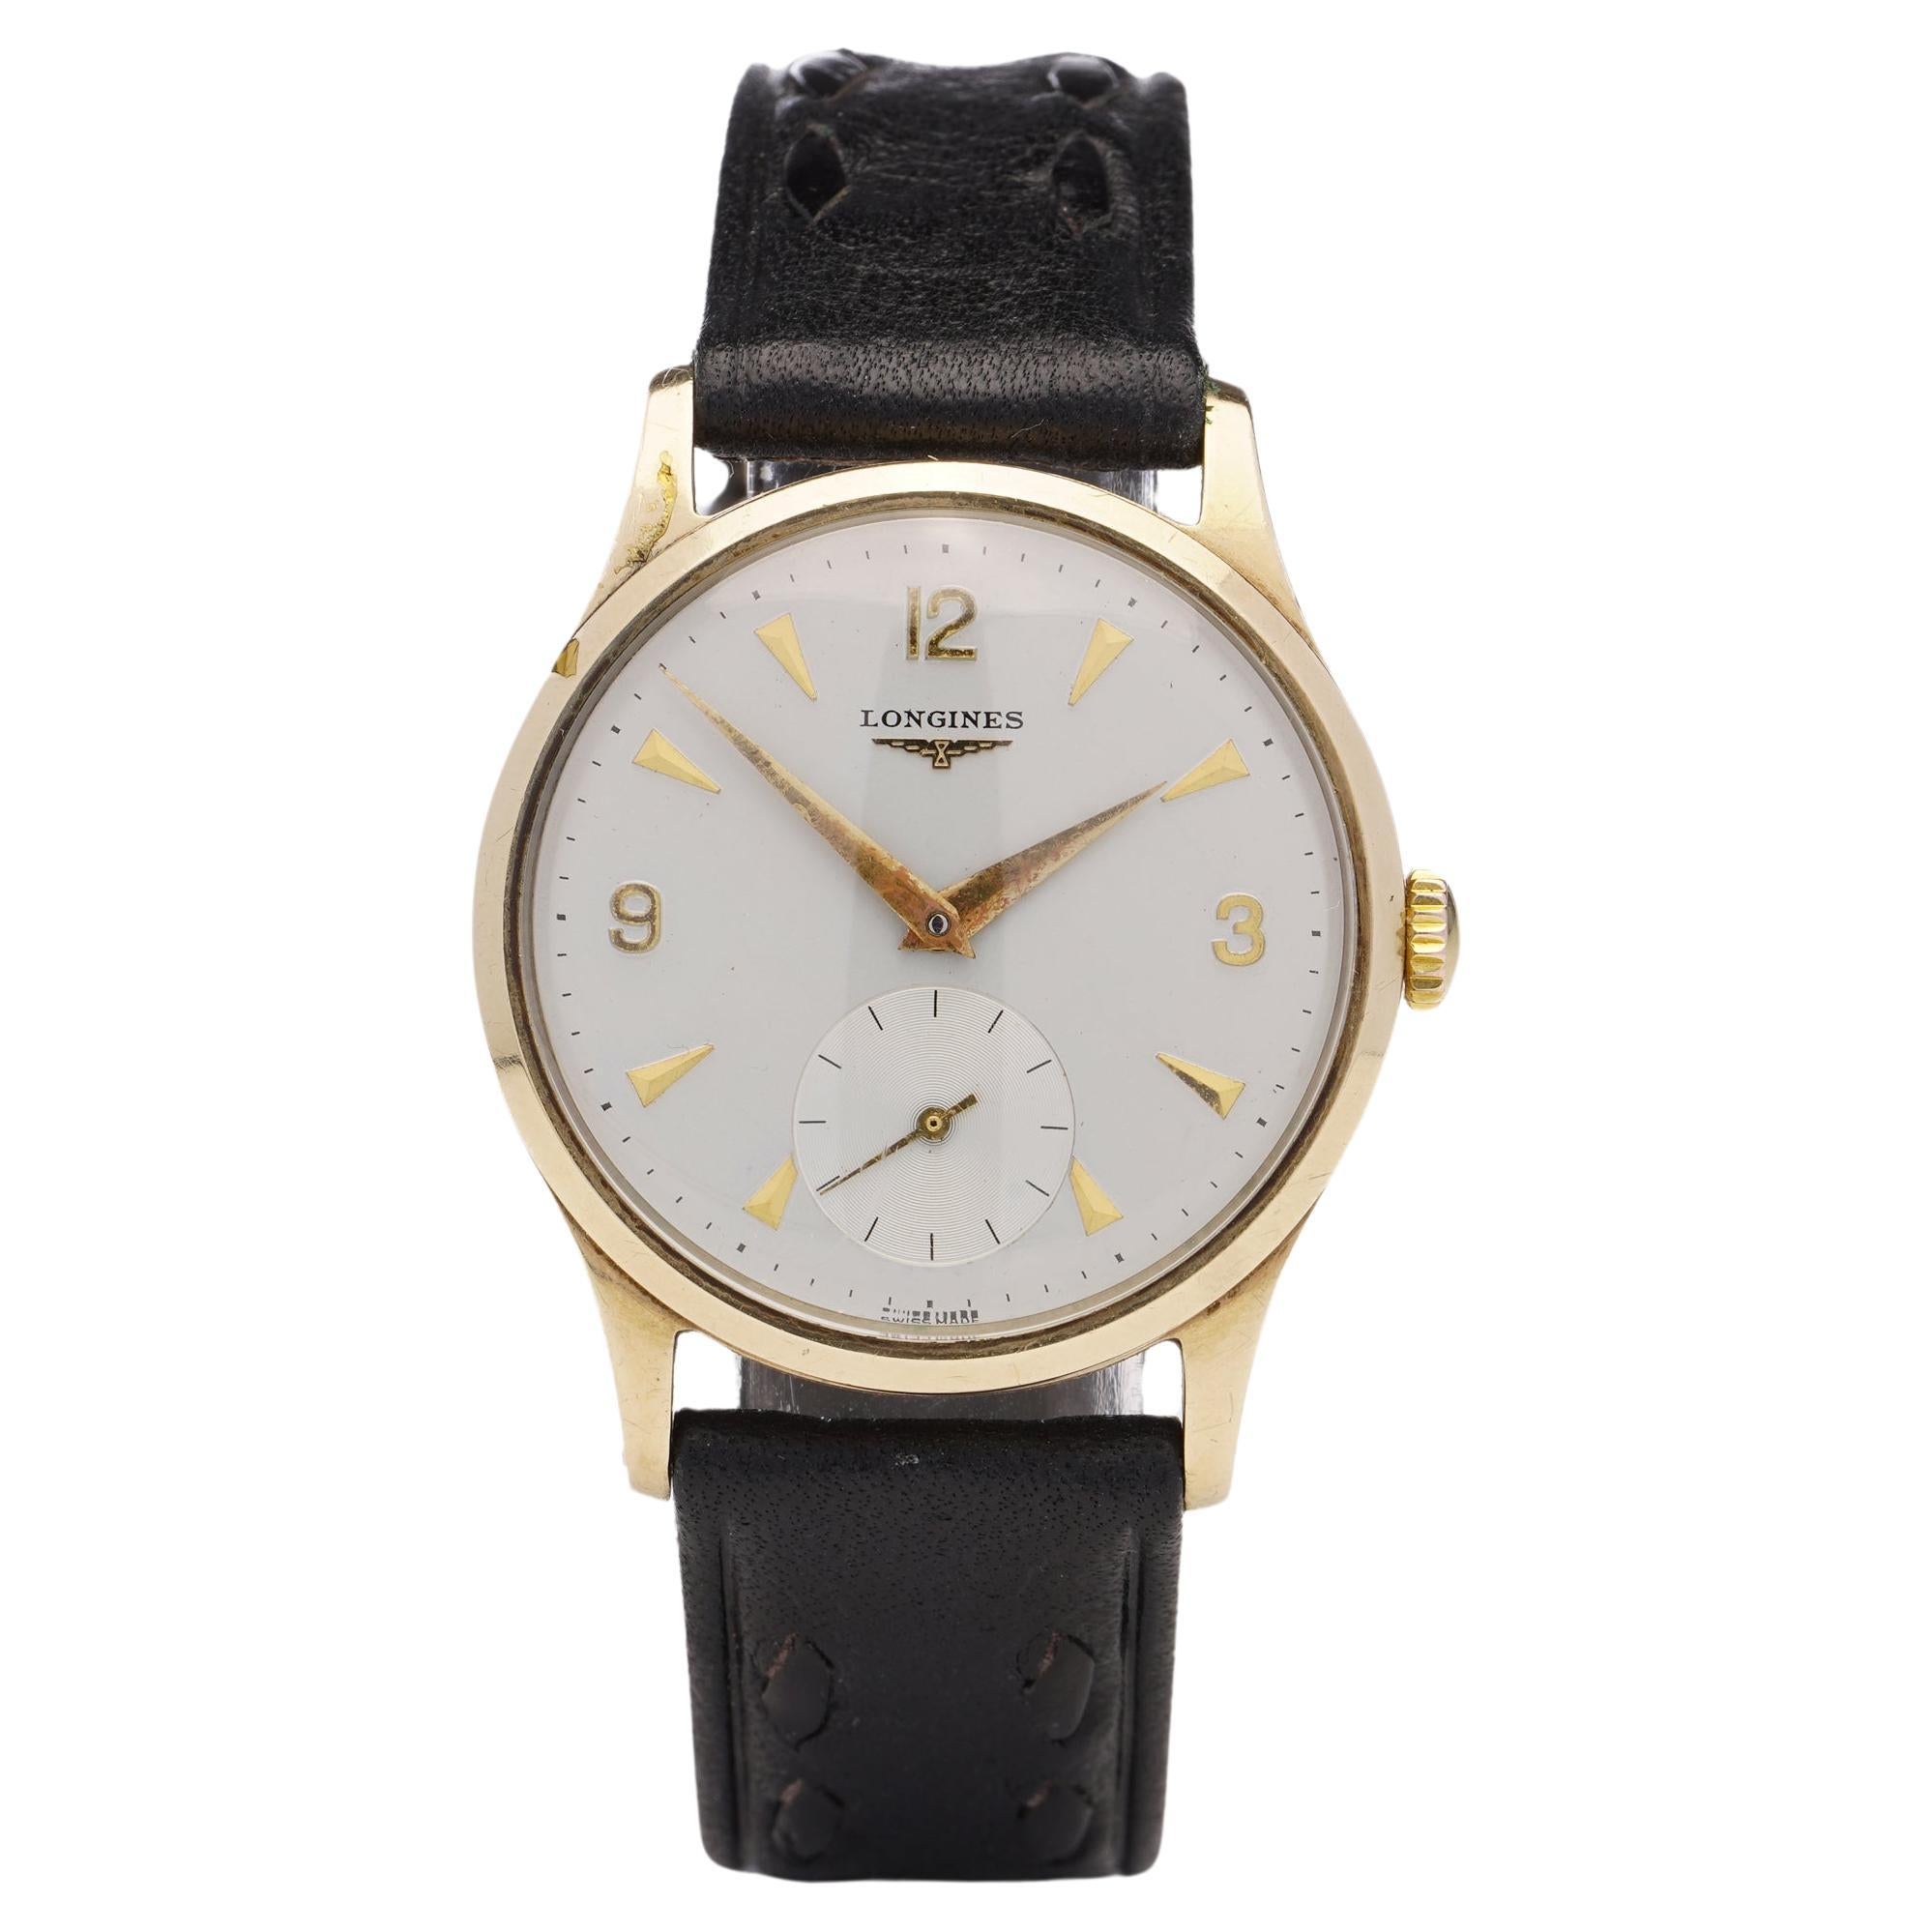 Longines 9kt. yellow gold men's manual winding wristwatch For Sale